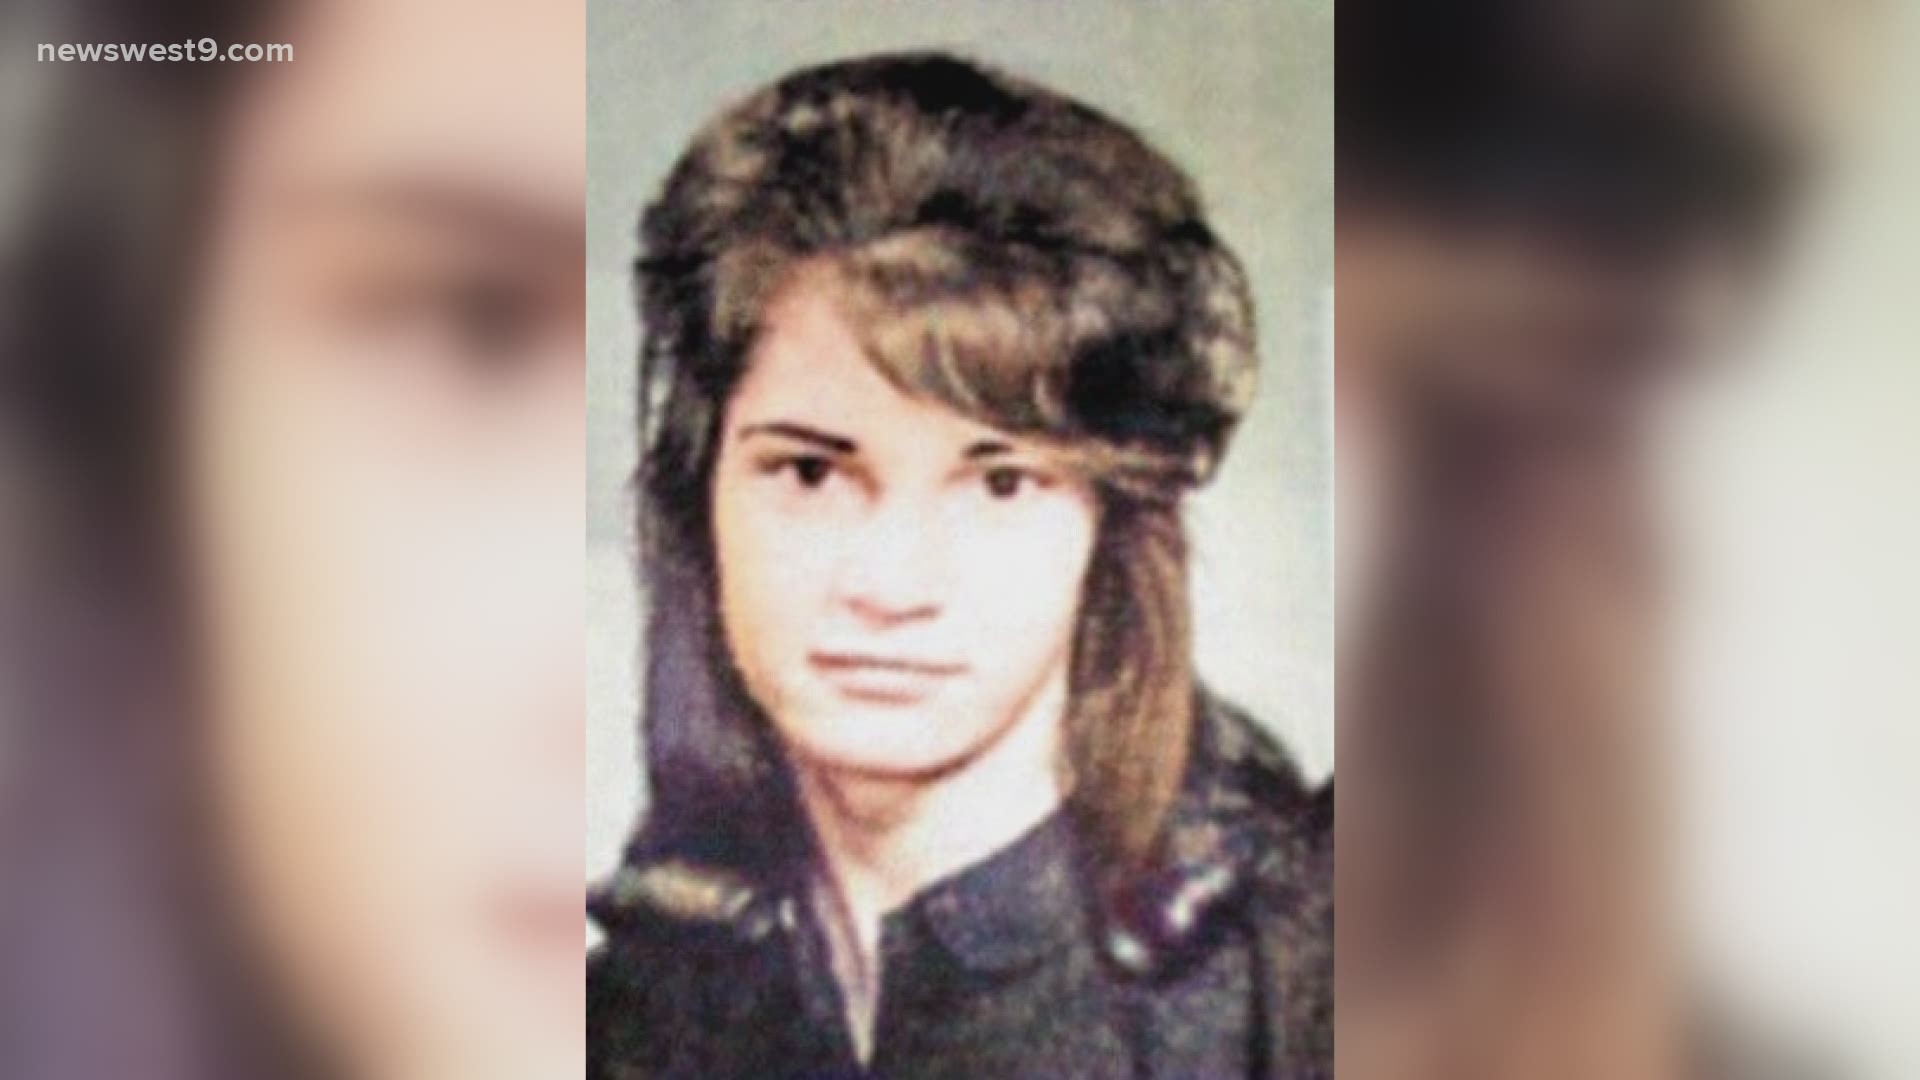 Police have partially solved the cold case of Jolaine Hemmy.